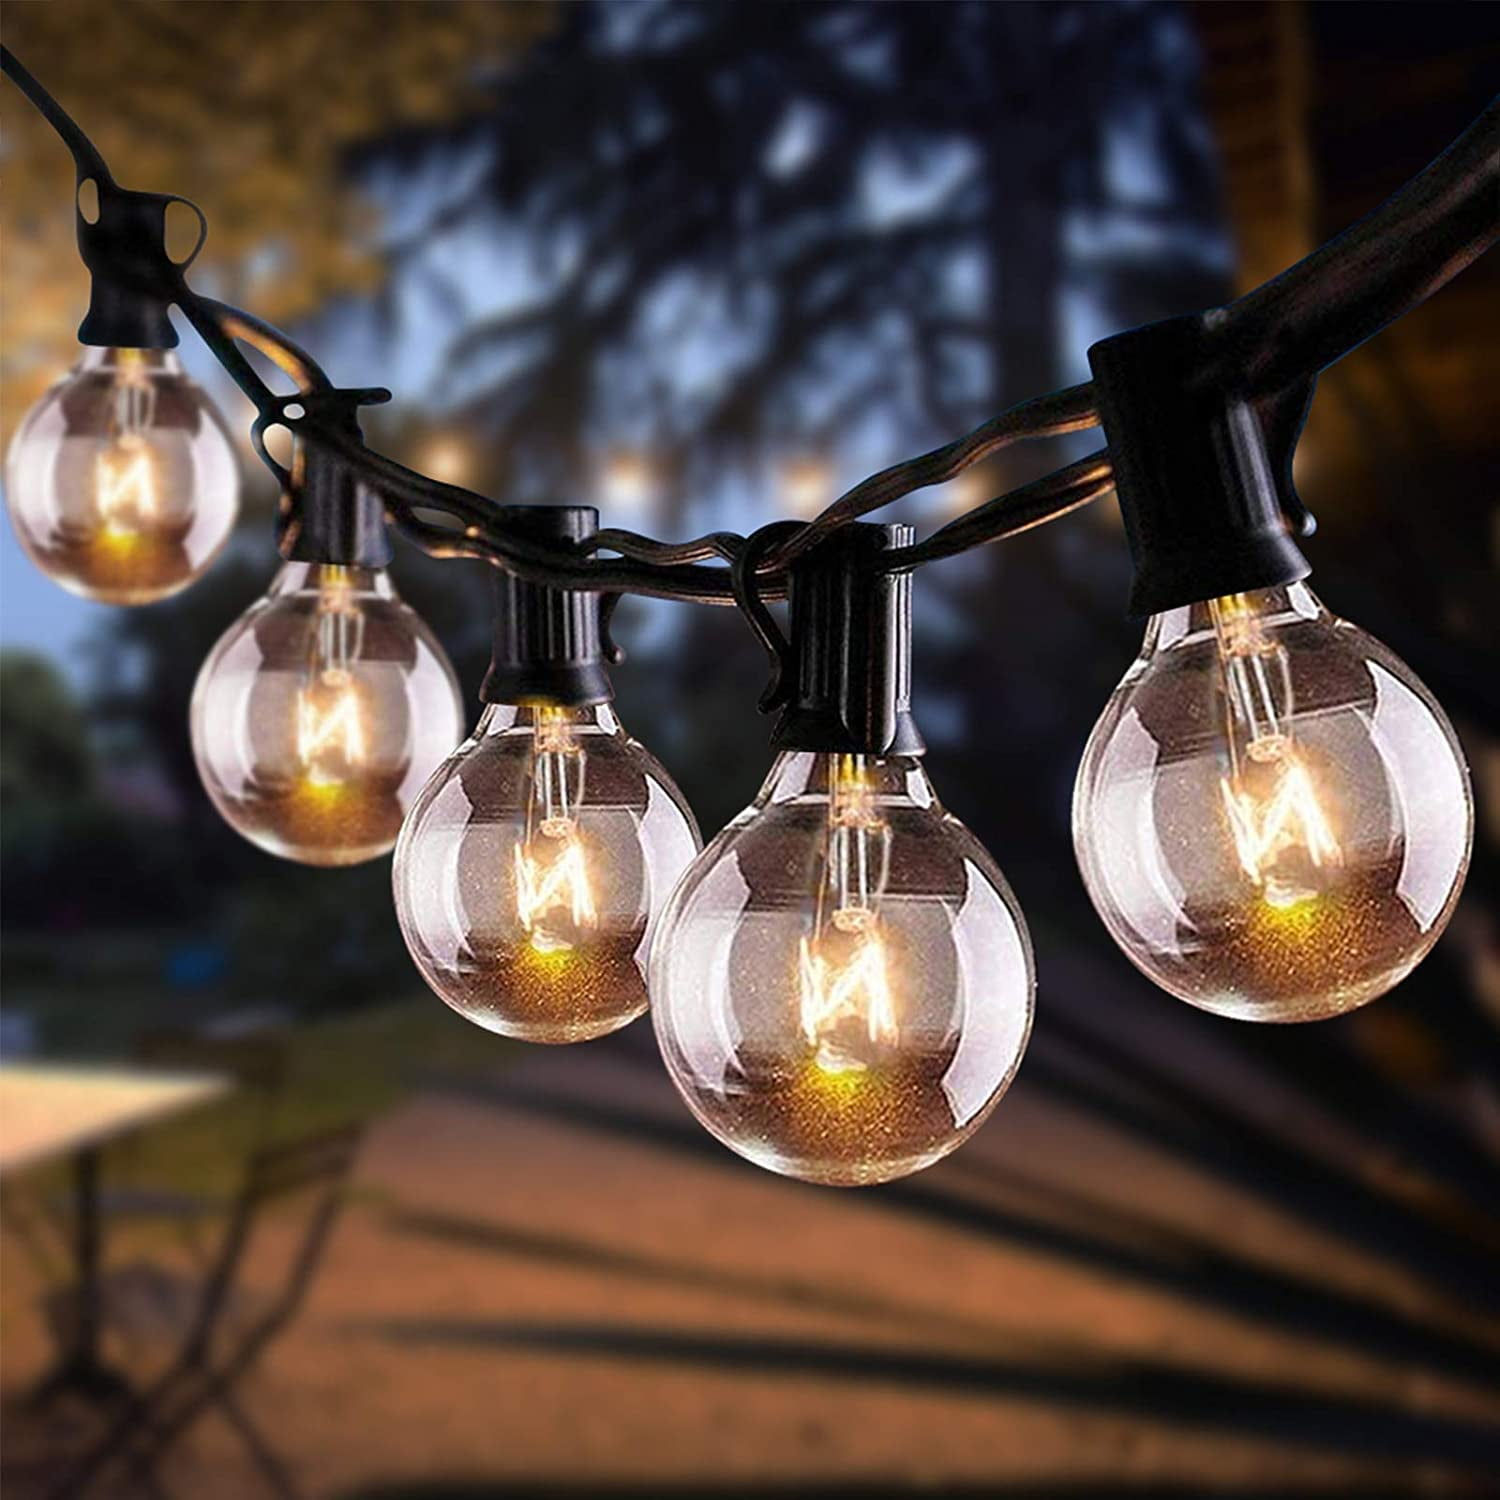 DAMAING Outdoor String Lights 100FT Globe String Lights with 52 Dimmable G40 Shatterproof LED Bulbs,Waterproof Connectable Patio Light String Lights for Backyard Hanging Lights,2700K Warm Glow 